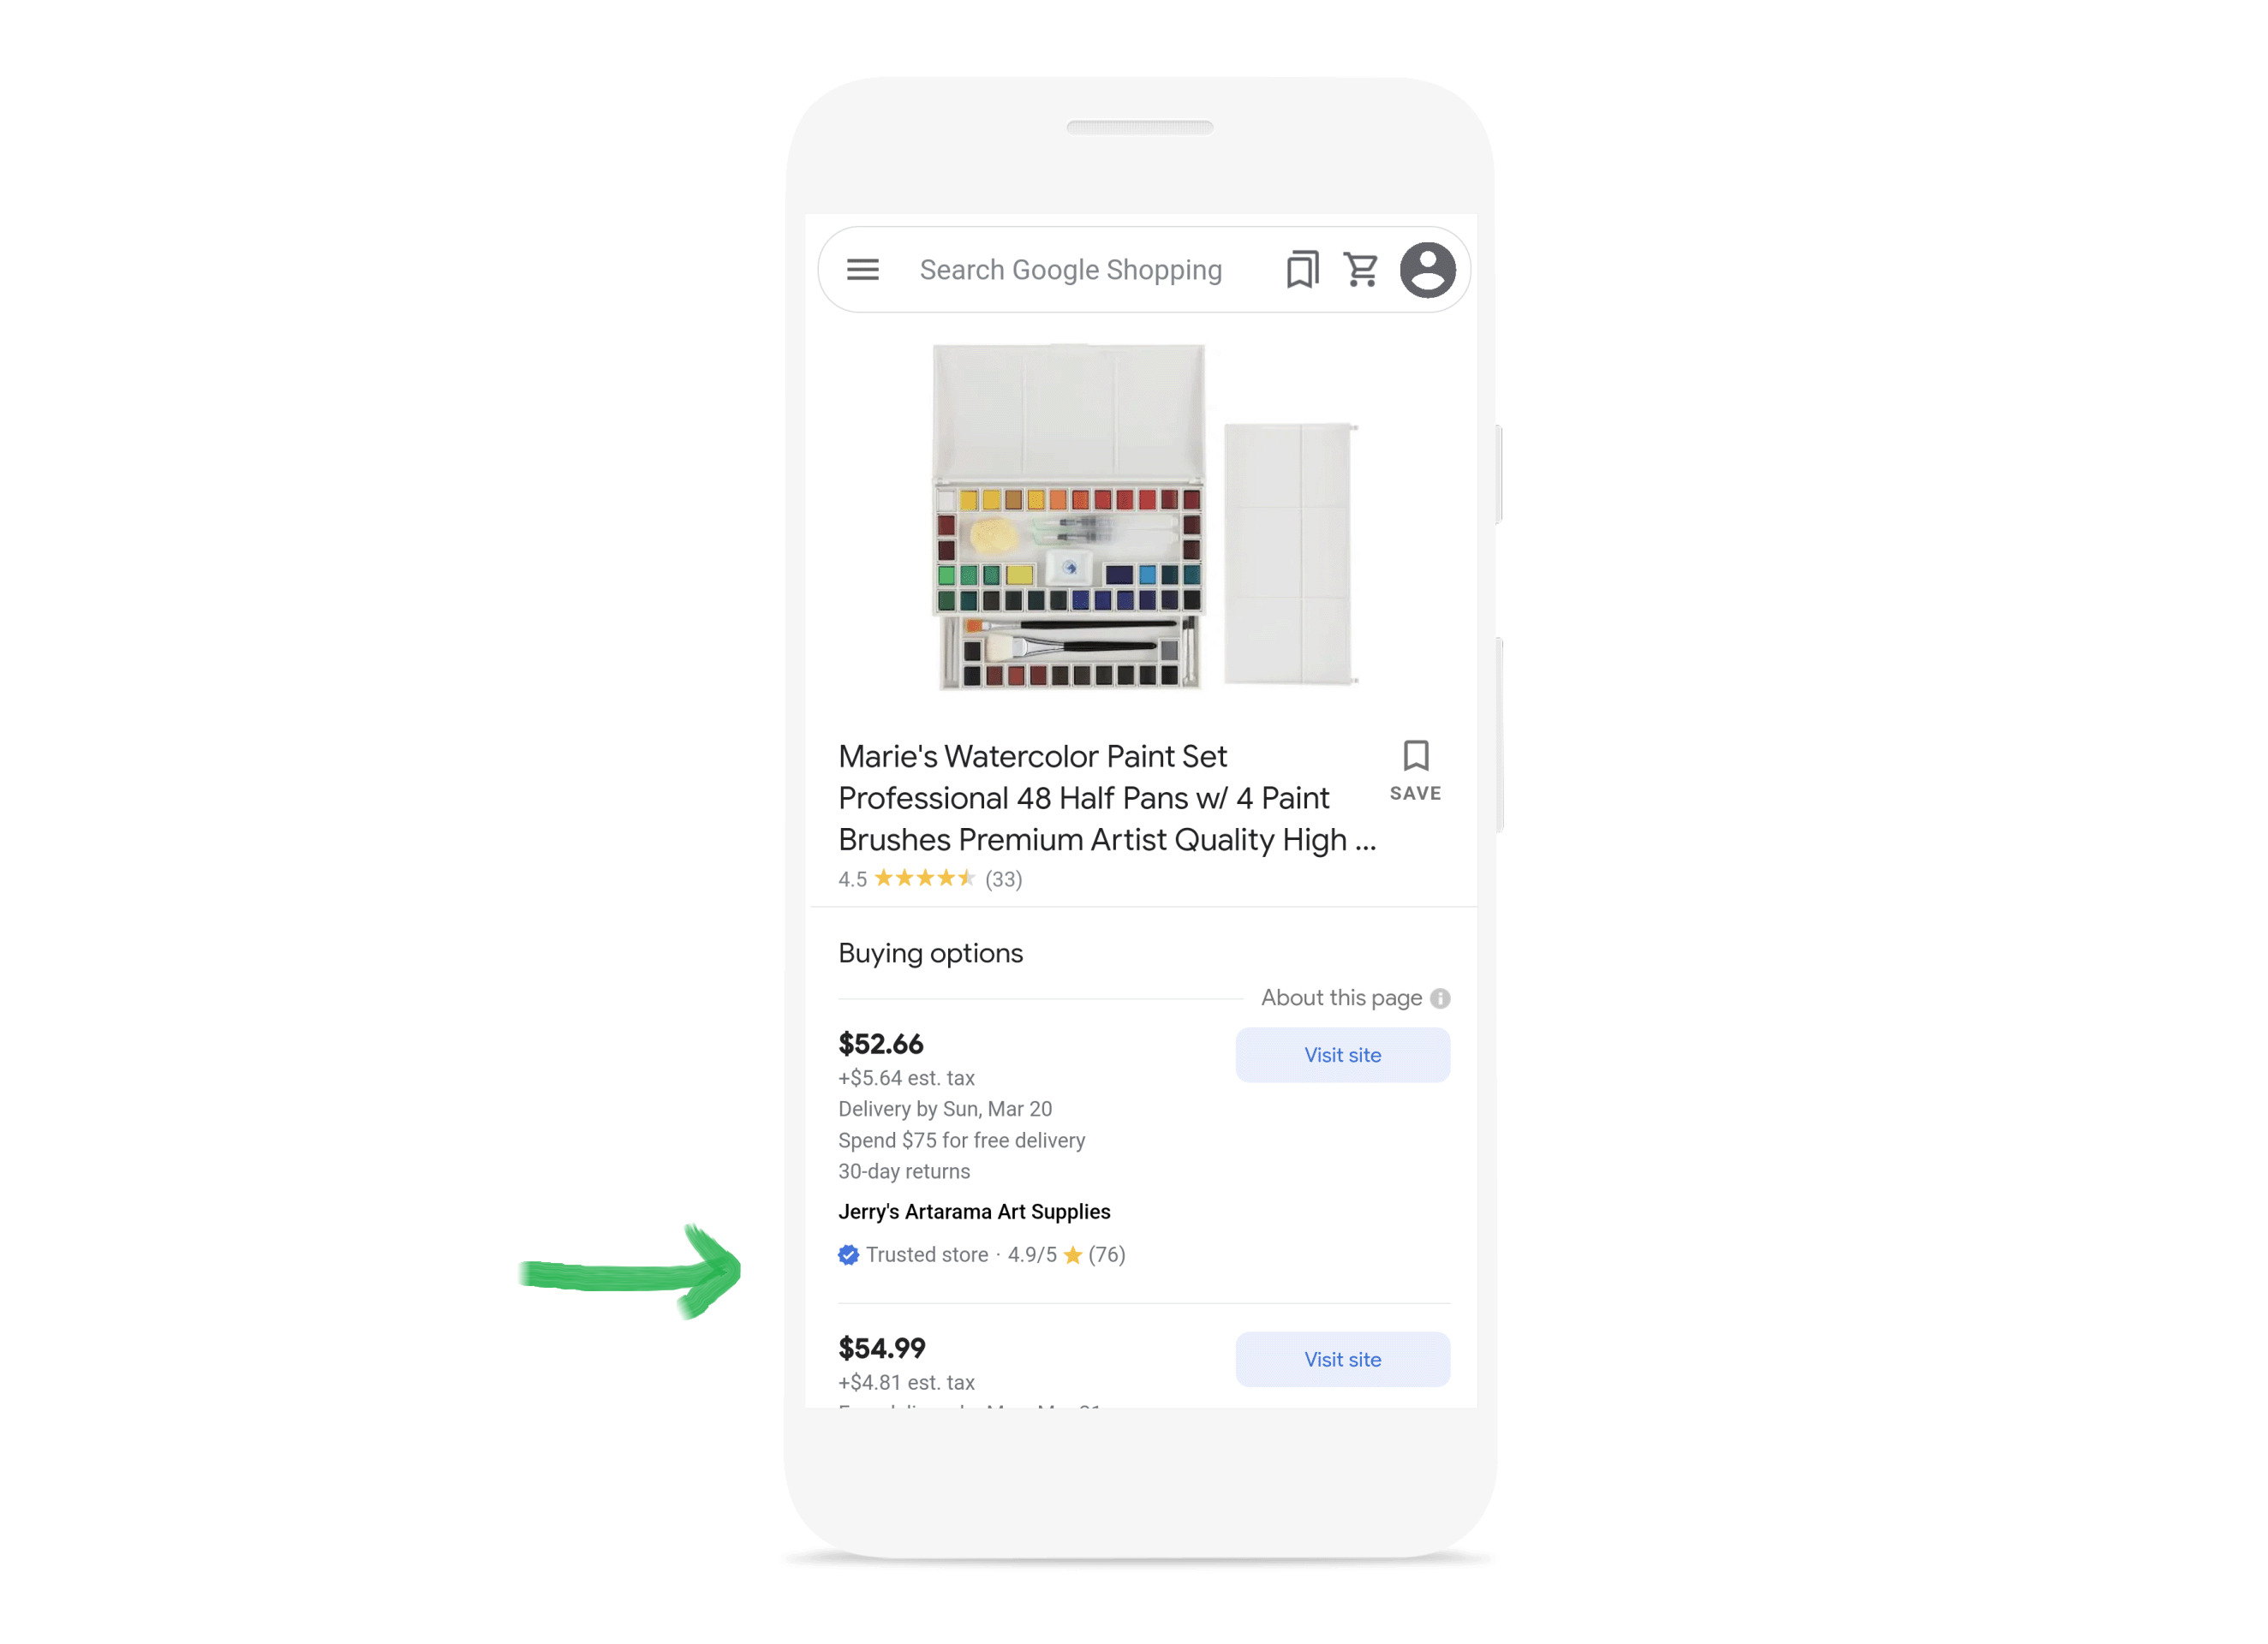 Google's shopping tab will soon show the stores that are verified and could be trusted. Such stores will be given trust badges on product listings. The thing is that google shopping is in the middle of a popularity battle with Amazon, and to win this war with Amazon, google has to acquire as many as possible “trusted store” badges on product pages. Trust badge helps the shopkeepers, store owners, merchants,etc. in elevating their business worth and reputation on Google’s Shopping Experience Scorecard and with potential clients on the other hand buyers get to see whether the business they are planning to spend their money on is worth it or not. Google shopping has come up with official criteria to assist online businesses thriving to expand and become popular. The trust badge distribution is solely based on the performance metrics of the stores. For example, how fast the ordered product is delivered to the buyers, the cost of shipping, whether the product allows the return or if it does what is the return fee. If all these standards prove to be customer friendly only then a blue checkmark like any other social media platform is awarded to the store showing that it is verified. The blue checkmark can be seen next to the ratings of the products in the Google buying list. This experiment showed that the store with a trust badge on google shopping received more clicks than those stores with no badge, which shows that people tend to trust, visit, and order the products from verified stores more than the other stores with no badge which also means that they did not meet the standards, therefore, not eligible for the trust badge.